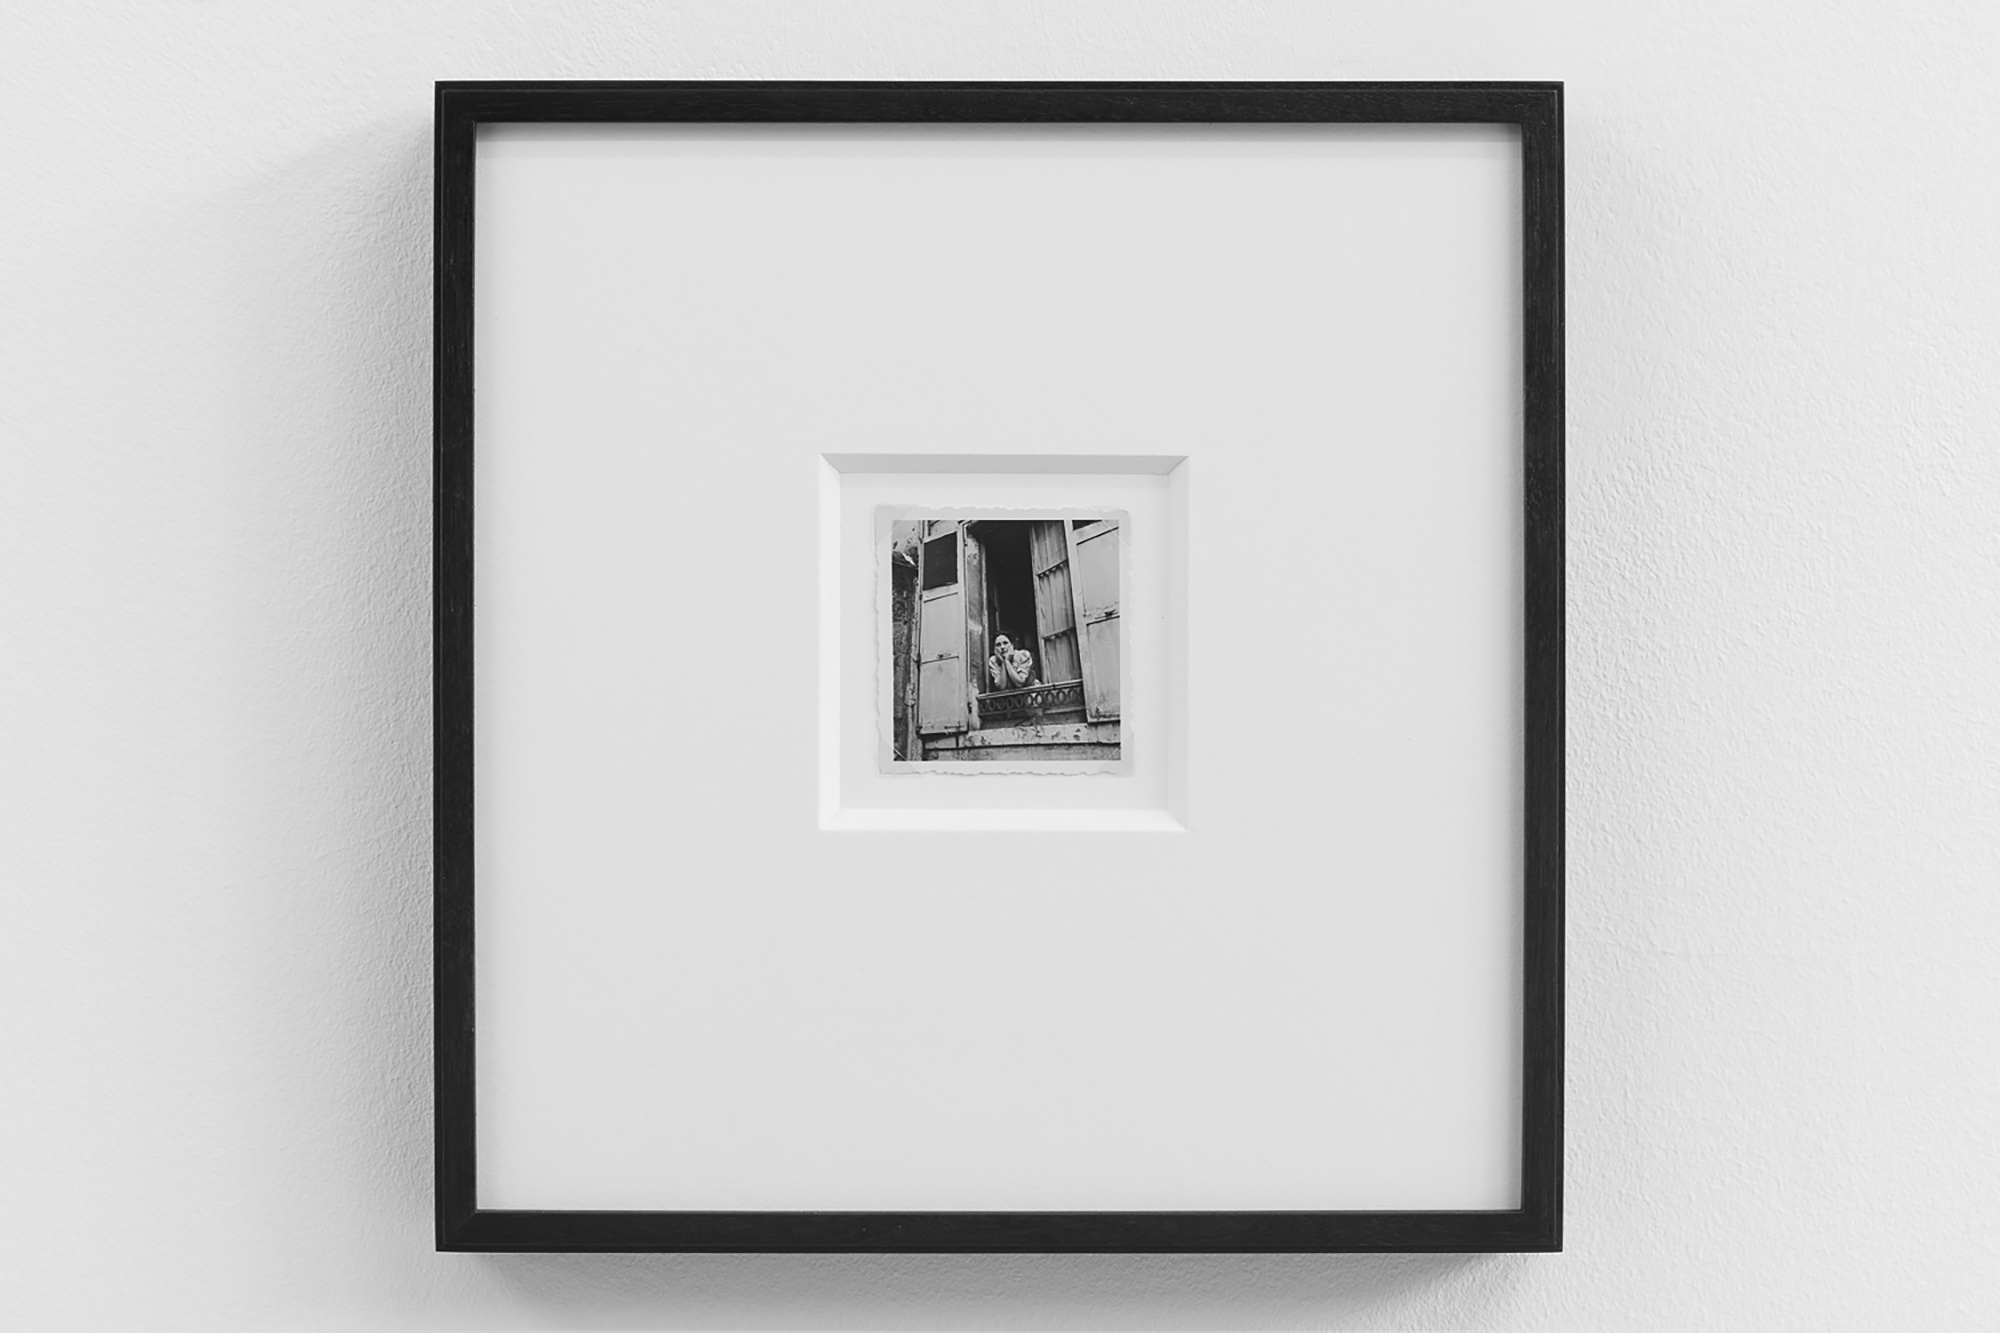 Framed photograph of a self portrait by Dora Maar. Exhibition at Huxley-Parlour Gallery, 45 Maddox Street W1S 2PE.